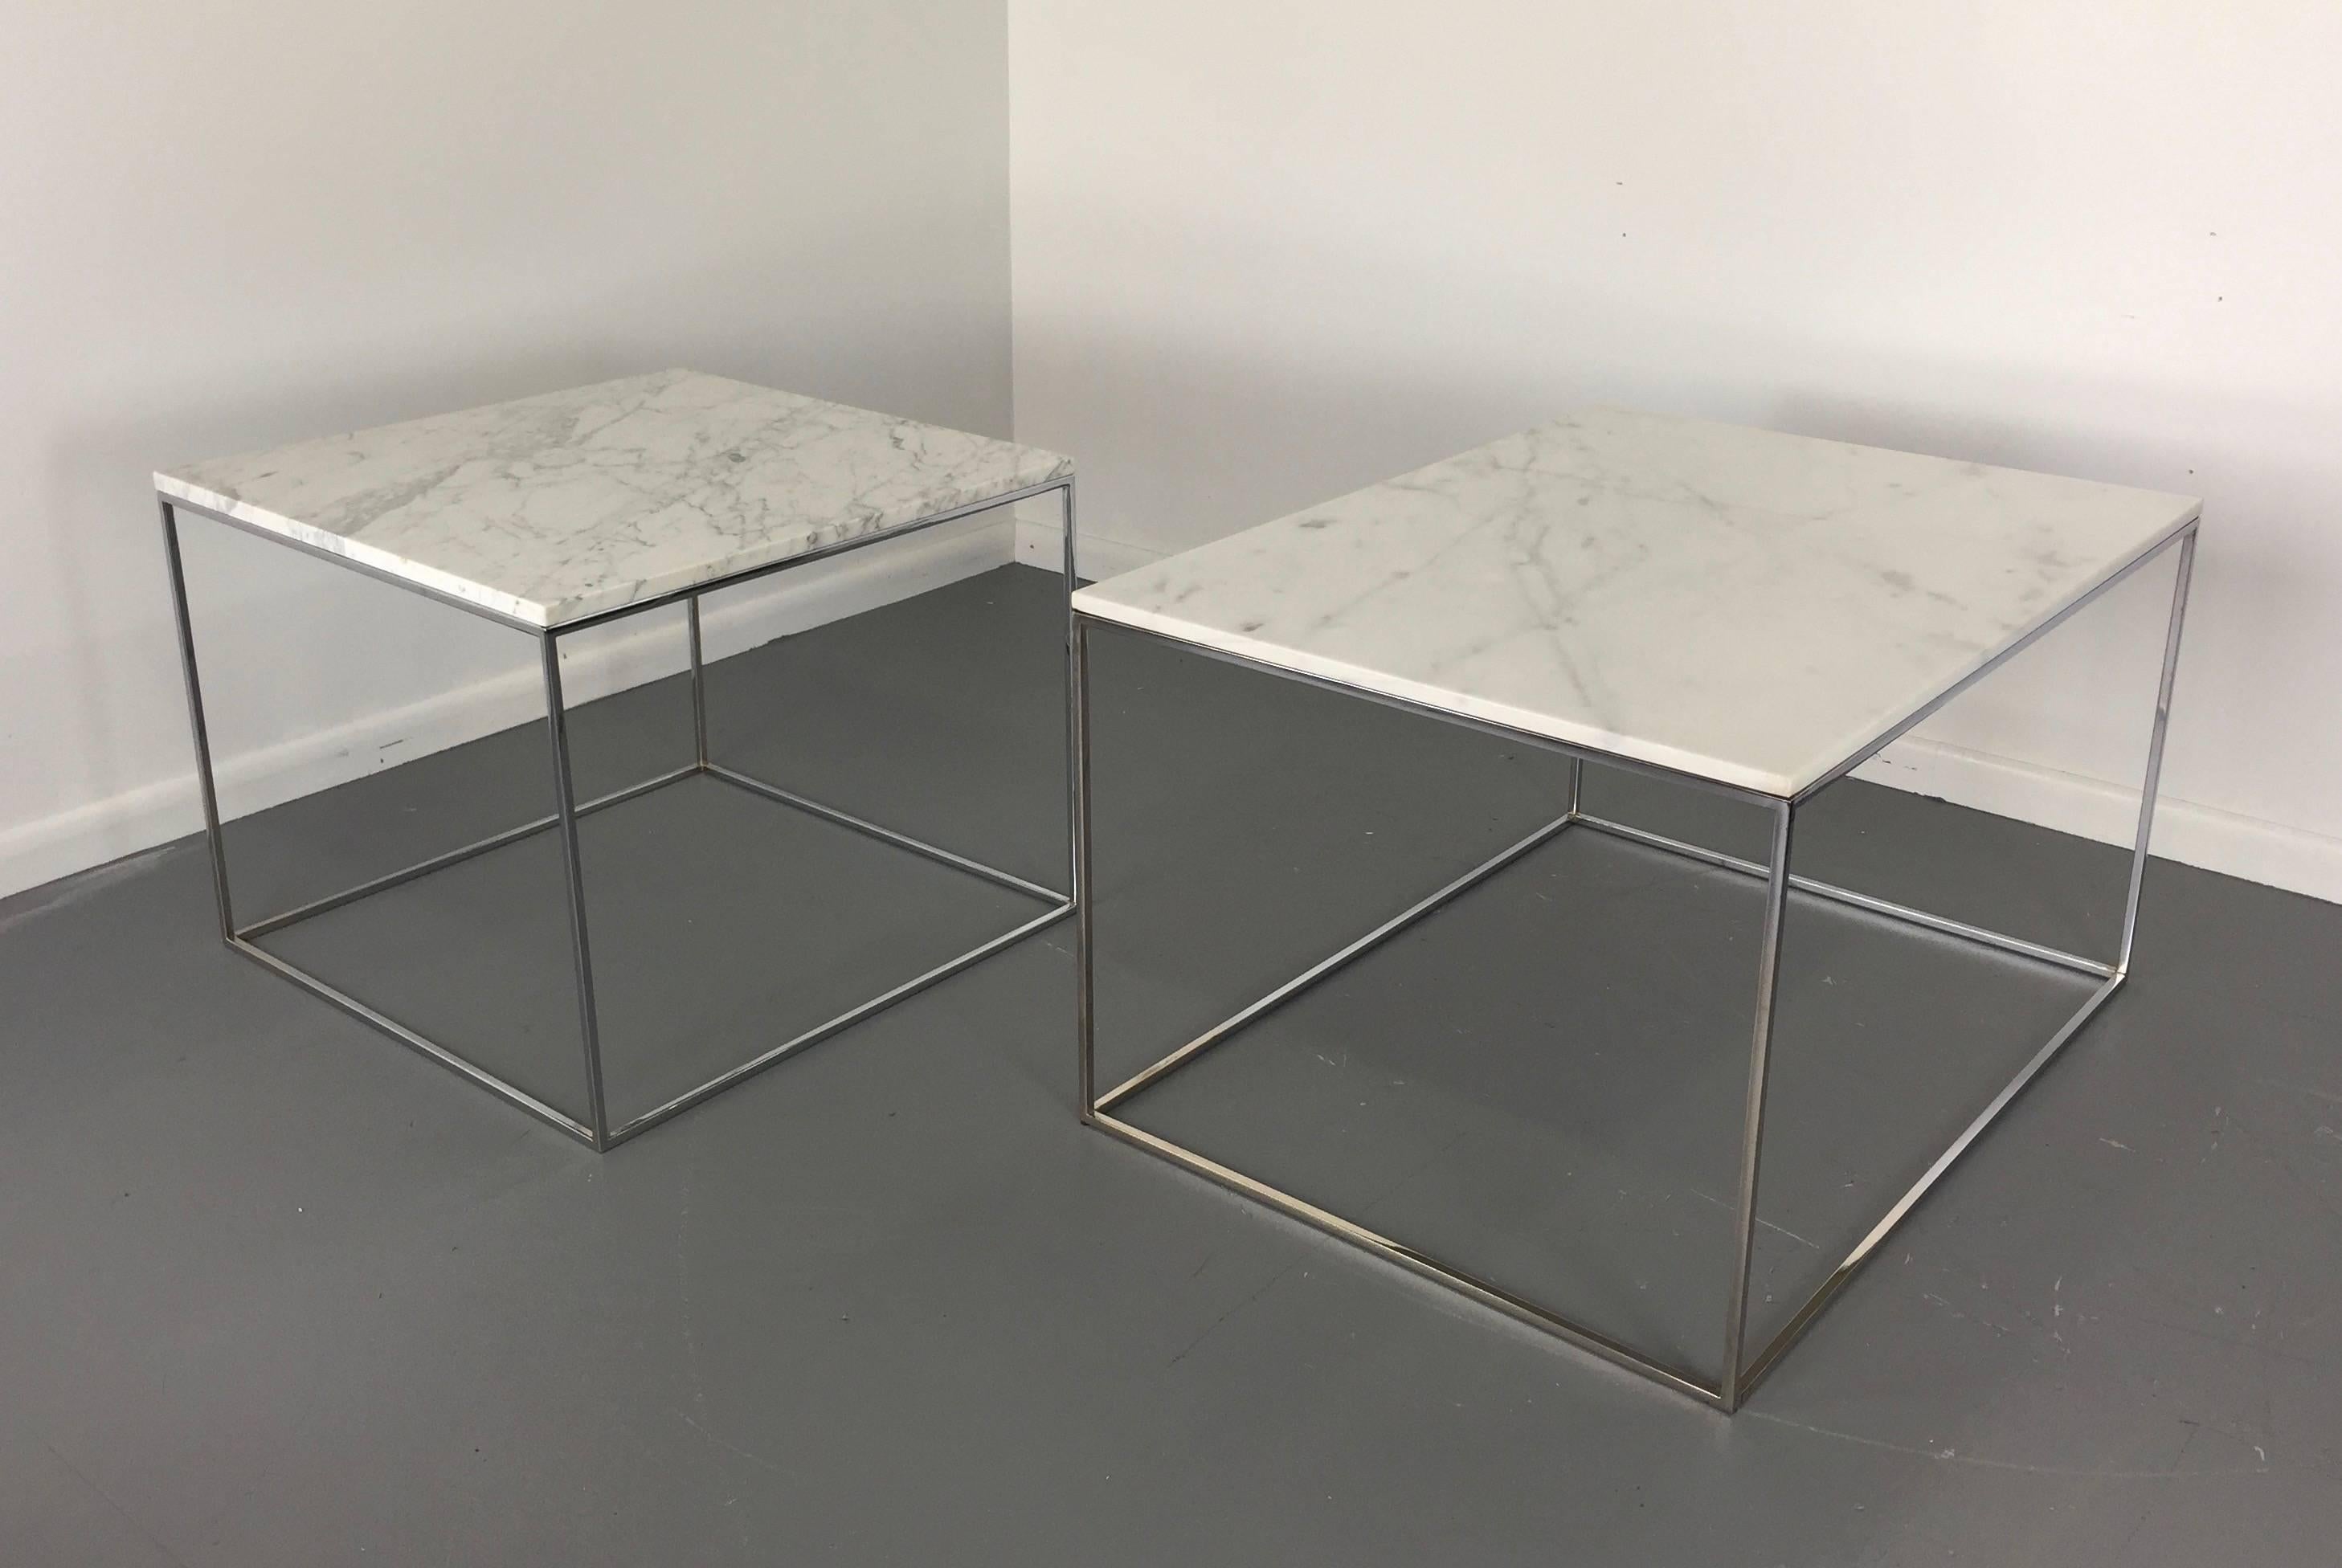 American Mid-Century Milo Baughman for Thayer Coggin chrome and marble side tables or end table. Featuring a rectangular and square shape with solid marble atop an open and square 1/2" tubular framework chrome base. Great multi use multi